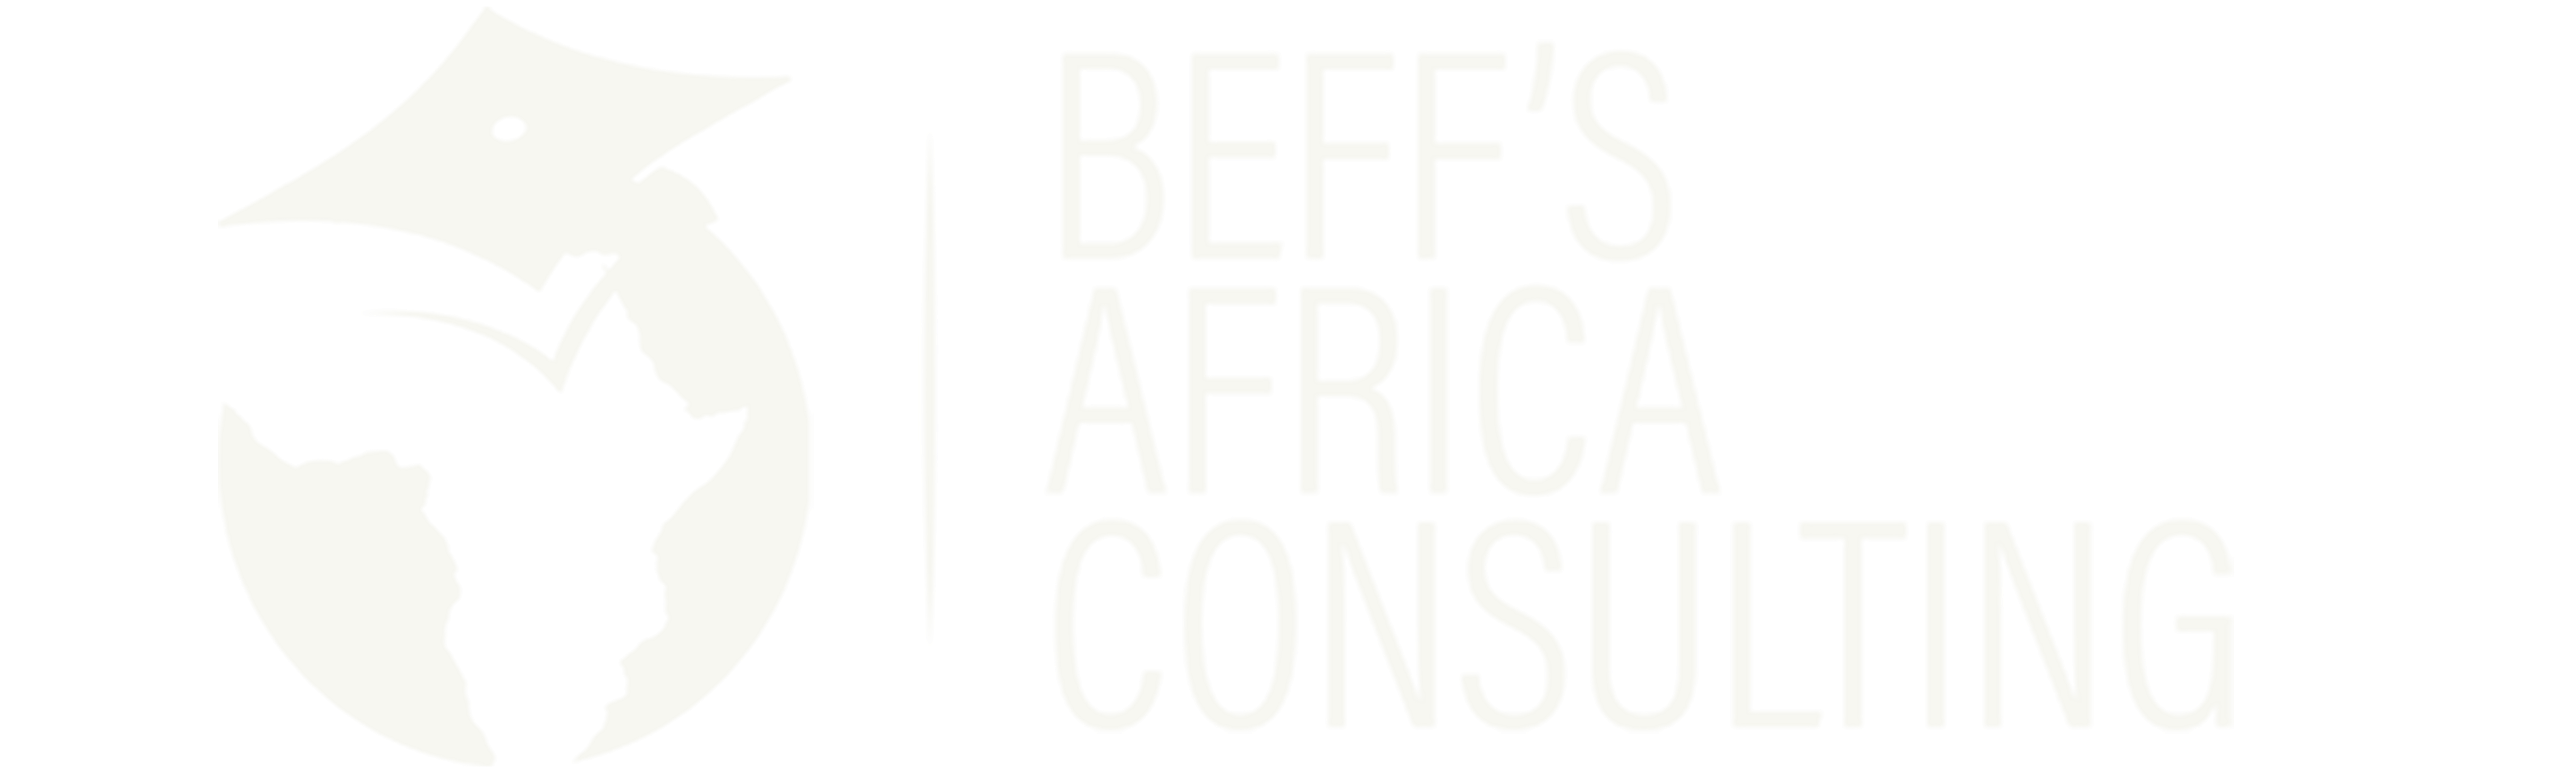 Beffs Africa Consulting